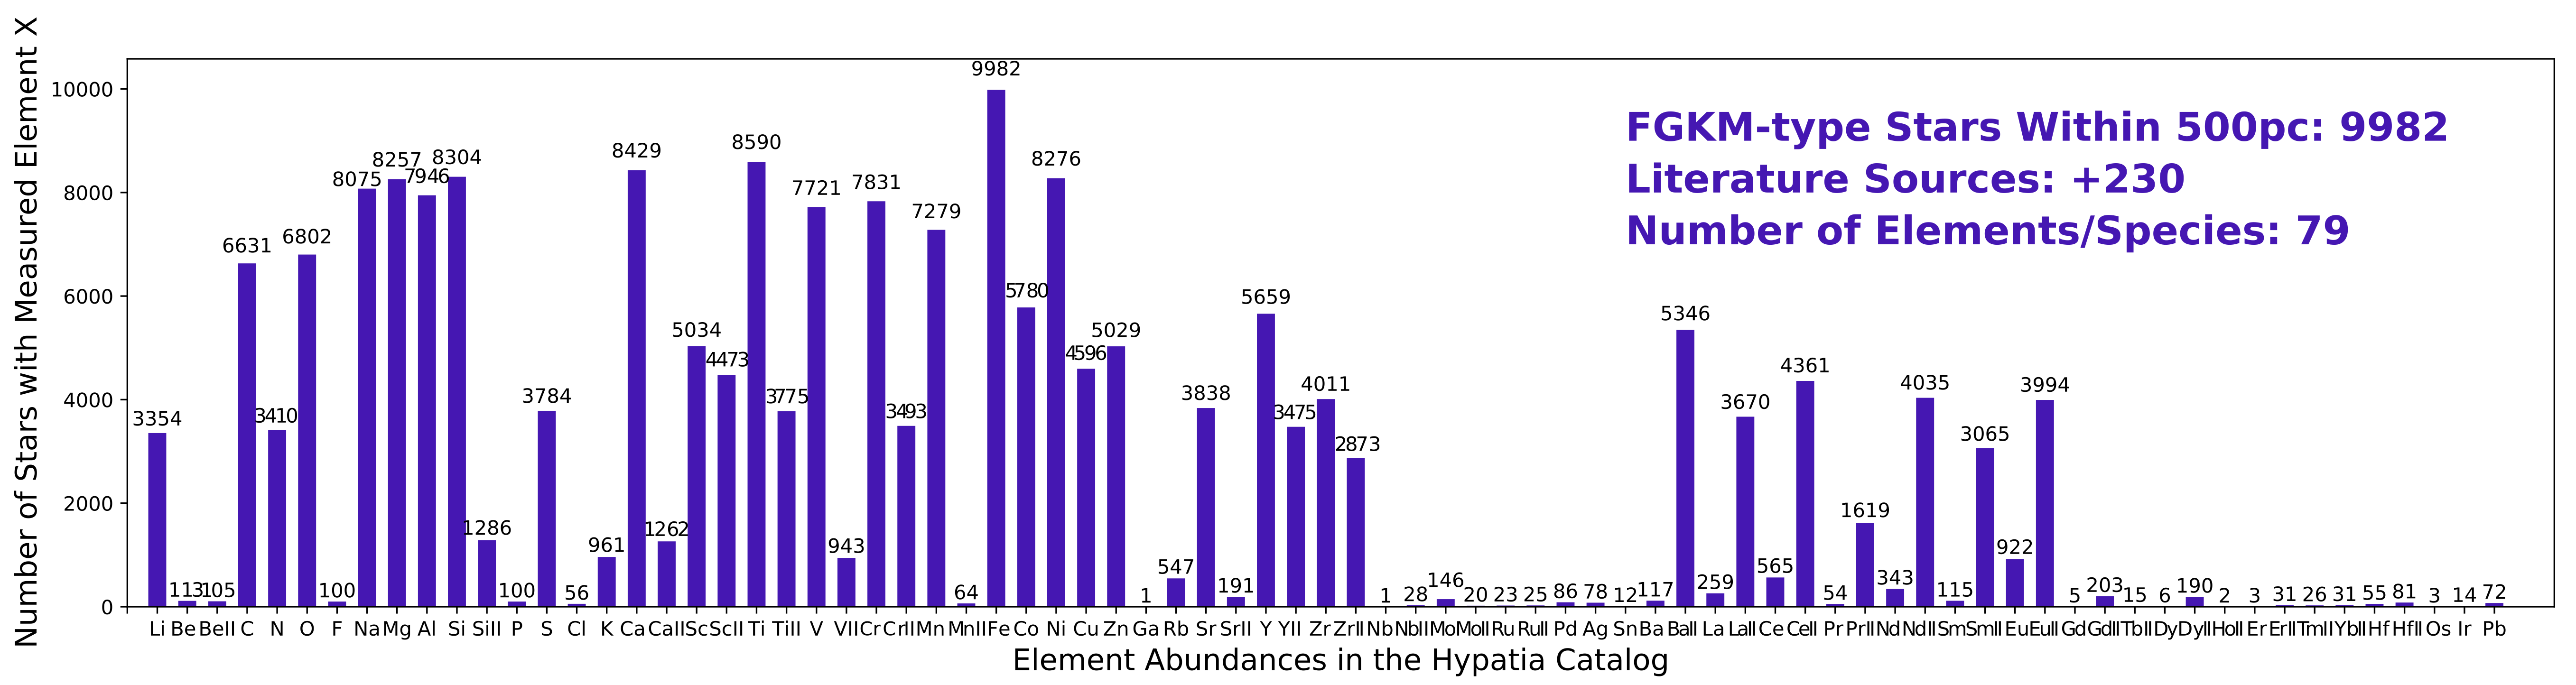 Histogram of the element abundances in the Hypatia Catalog and the number of stars for which each element has been measured.